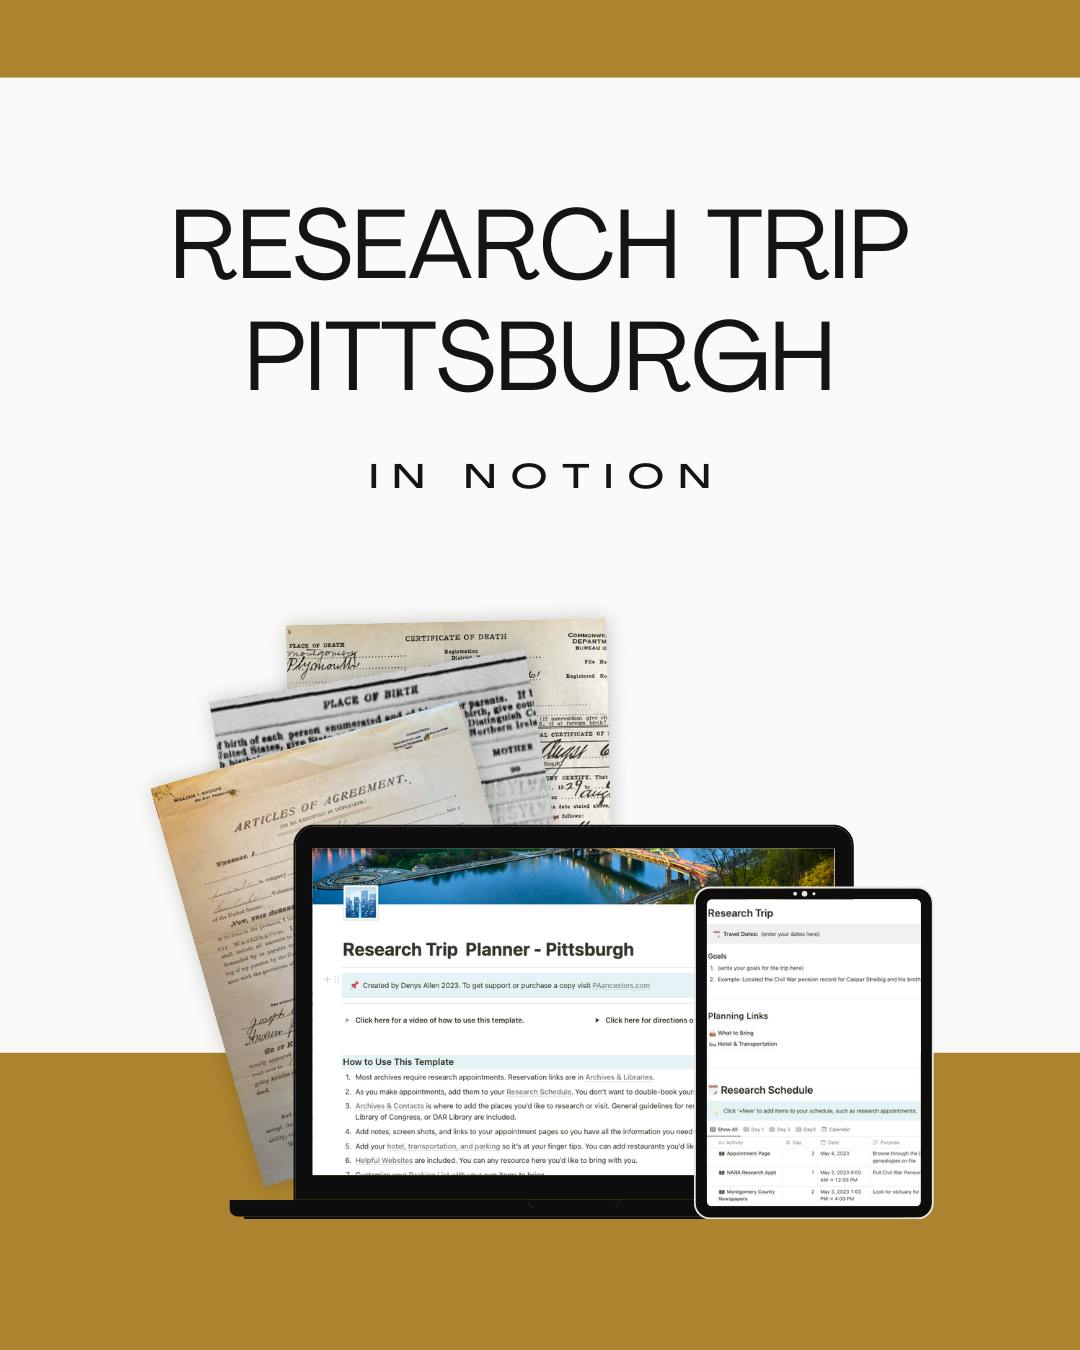 Research Trip Planner - Pittsburgh